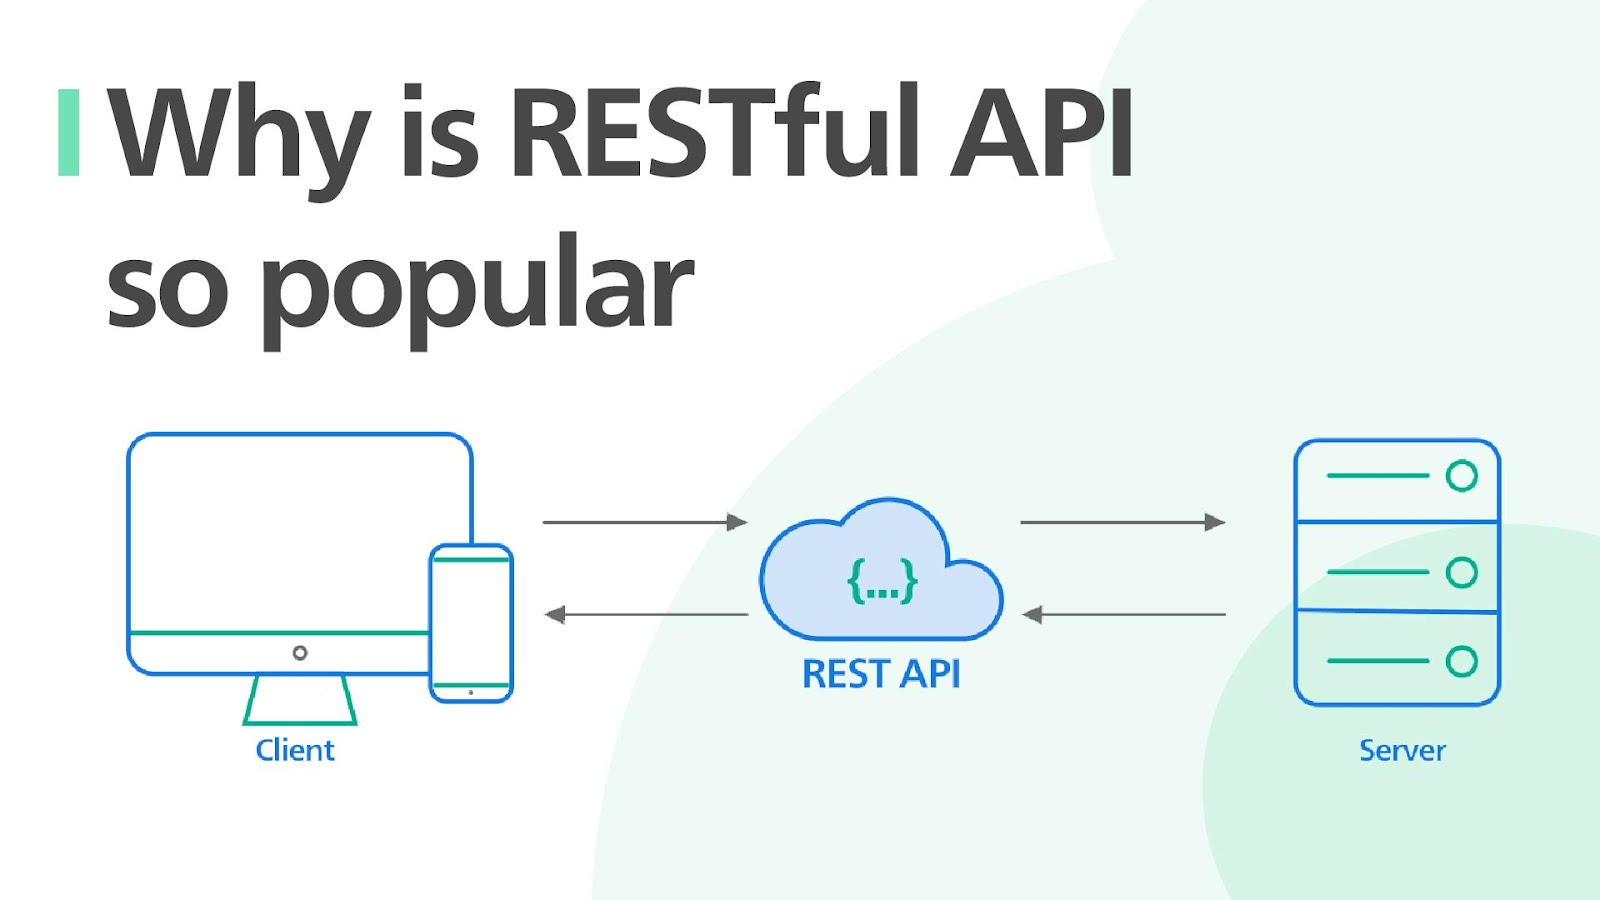 Why is REST API so popular?